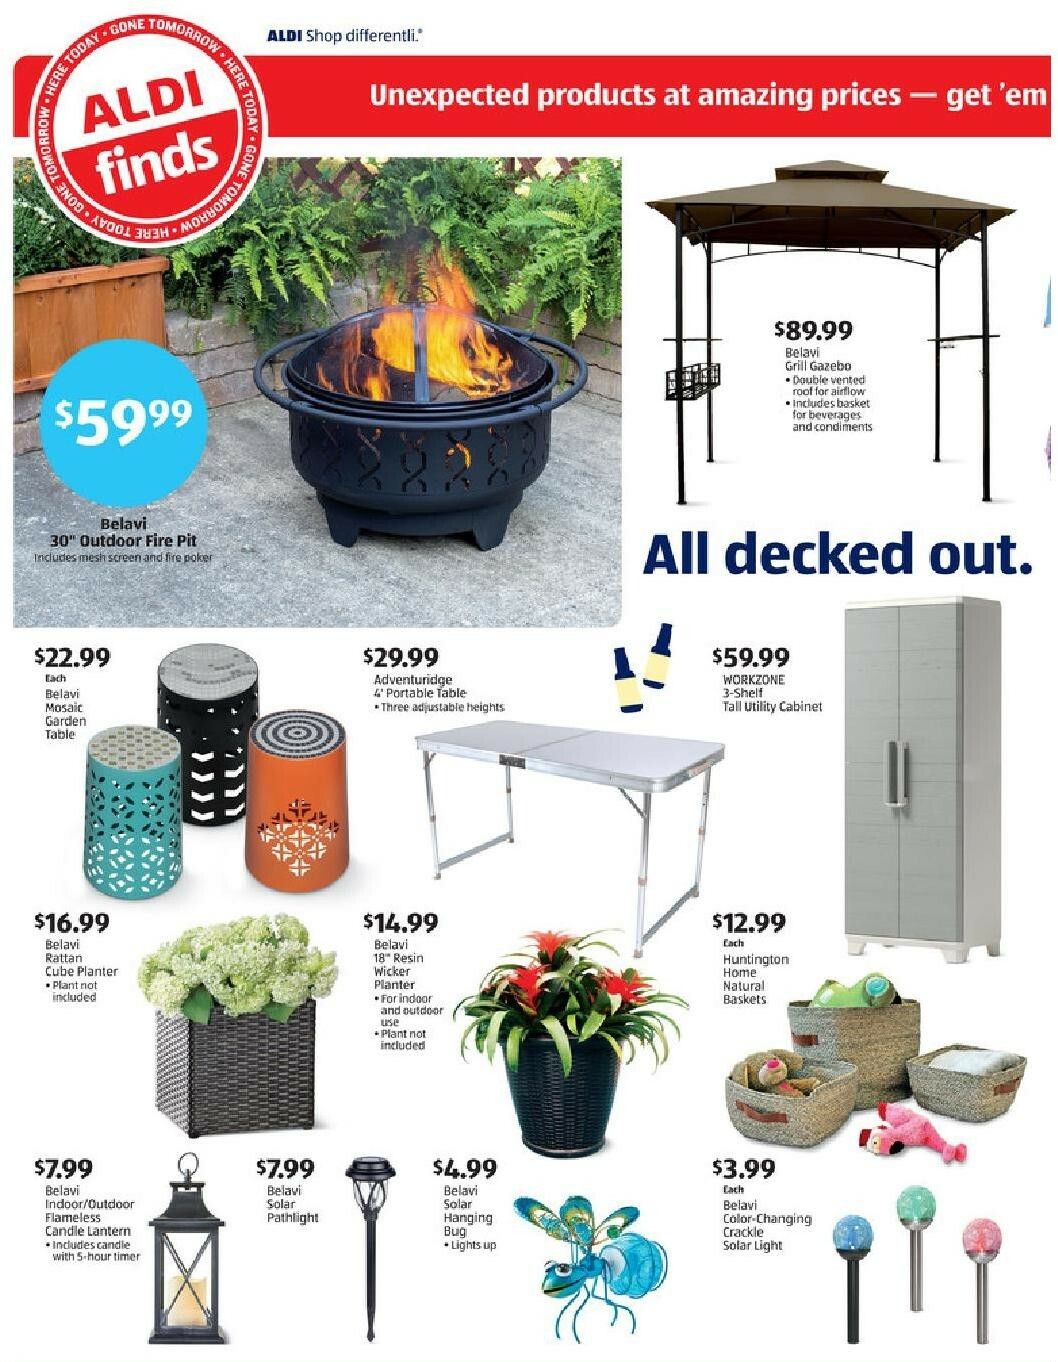 ALDI Weekly Ad from June 6